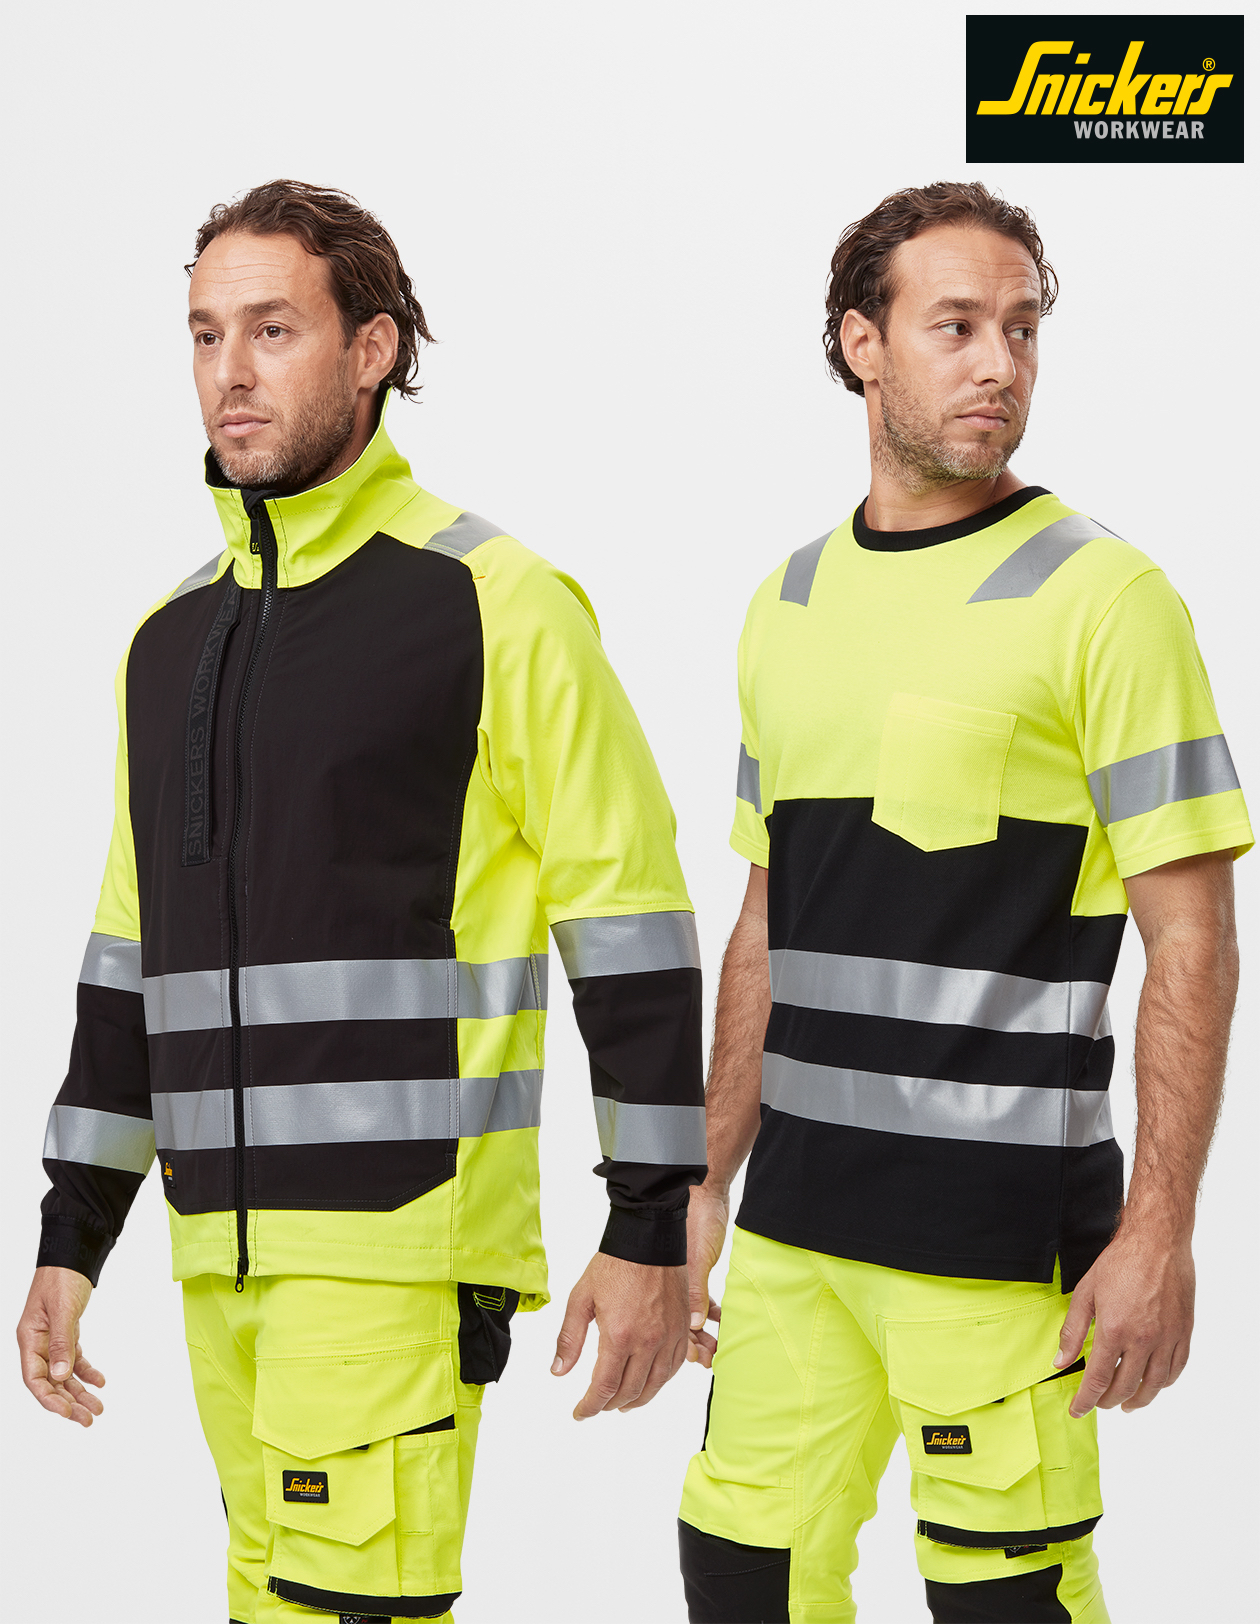 Enhanced Visibility and Safety With Snickers Workwear Hi-Vis. @SnickersWw_UK